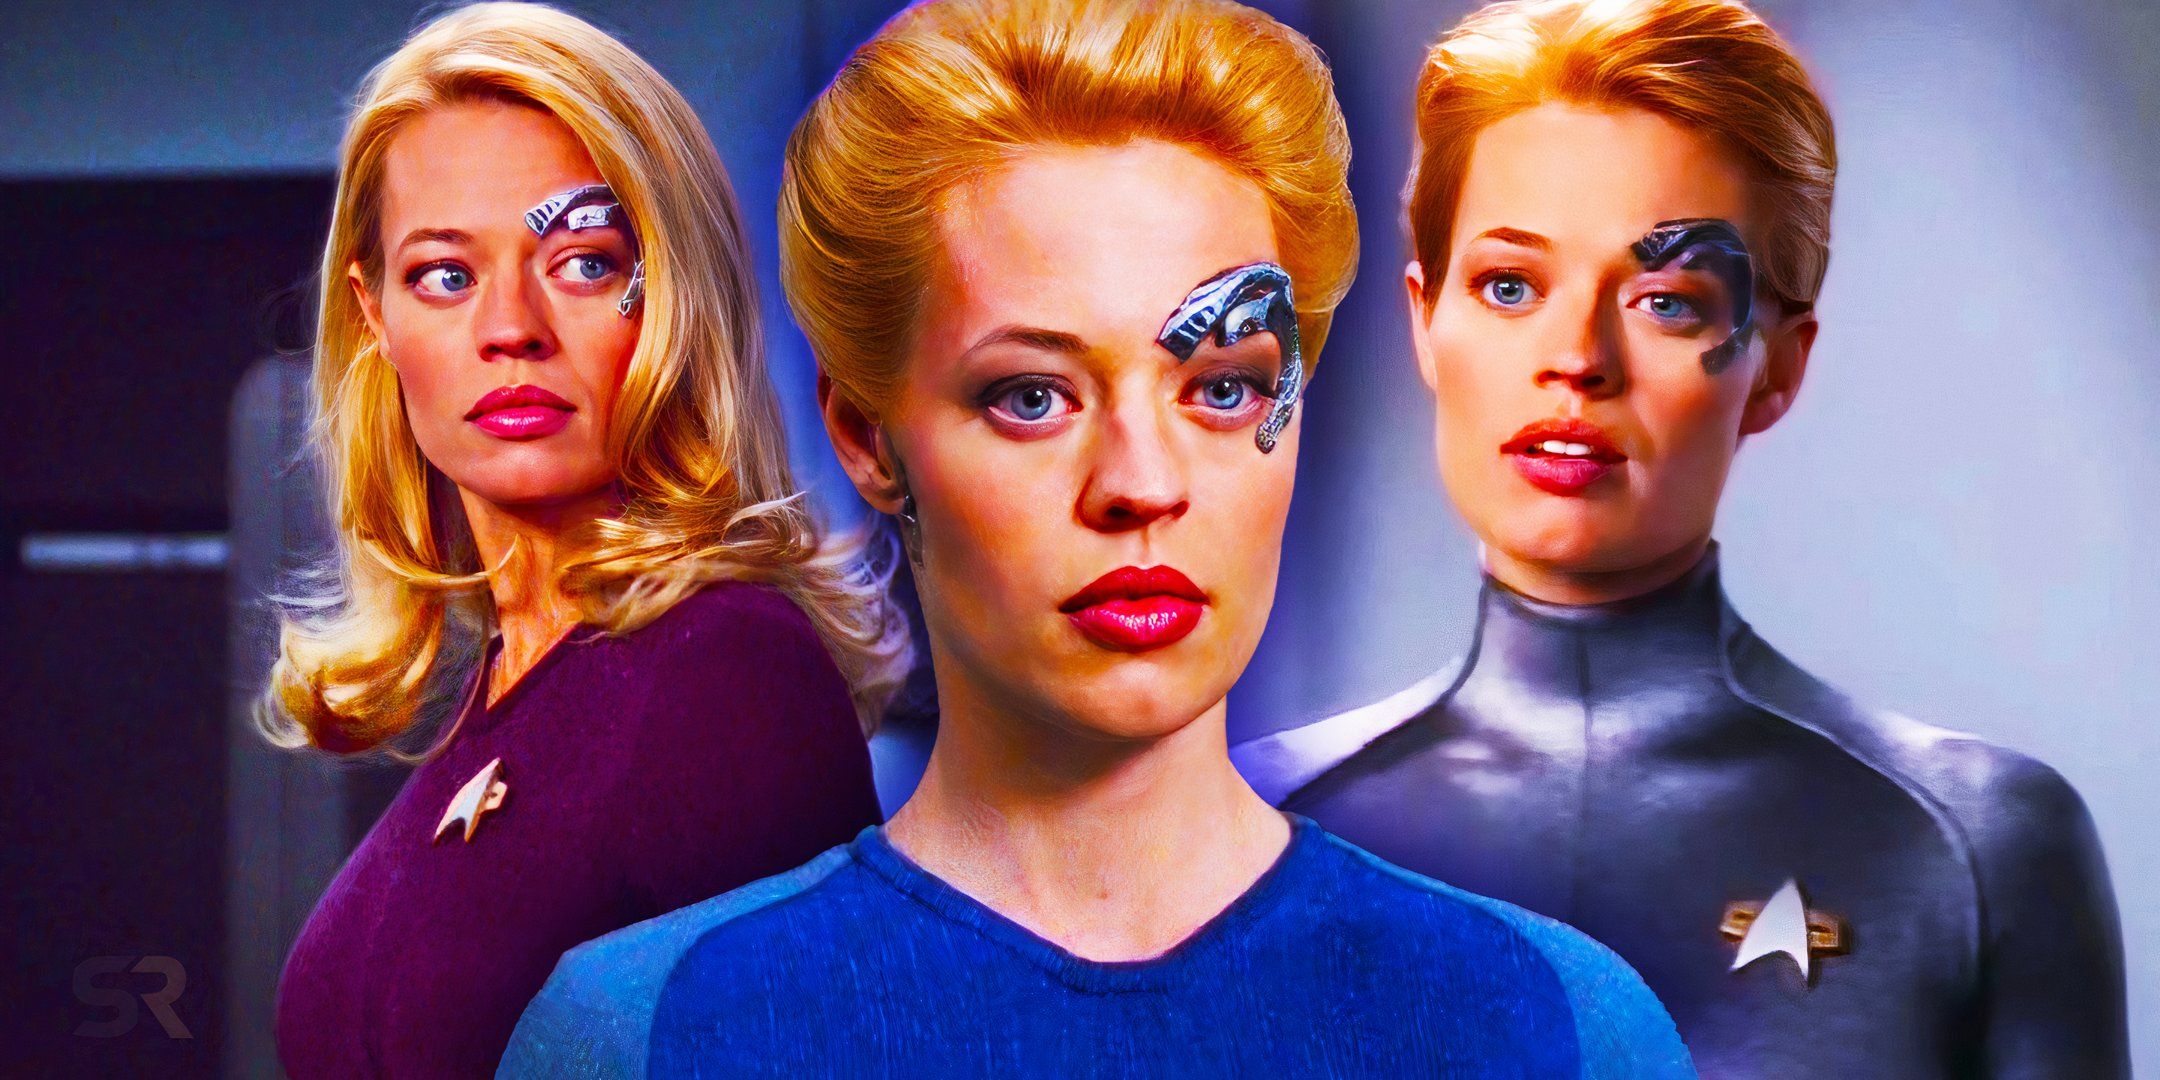 Jeri Ryan as Seven of Nine on Star Trek: Voyager in three different costumes: purple, two-tone blue, and silver catsuits.